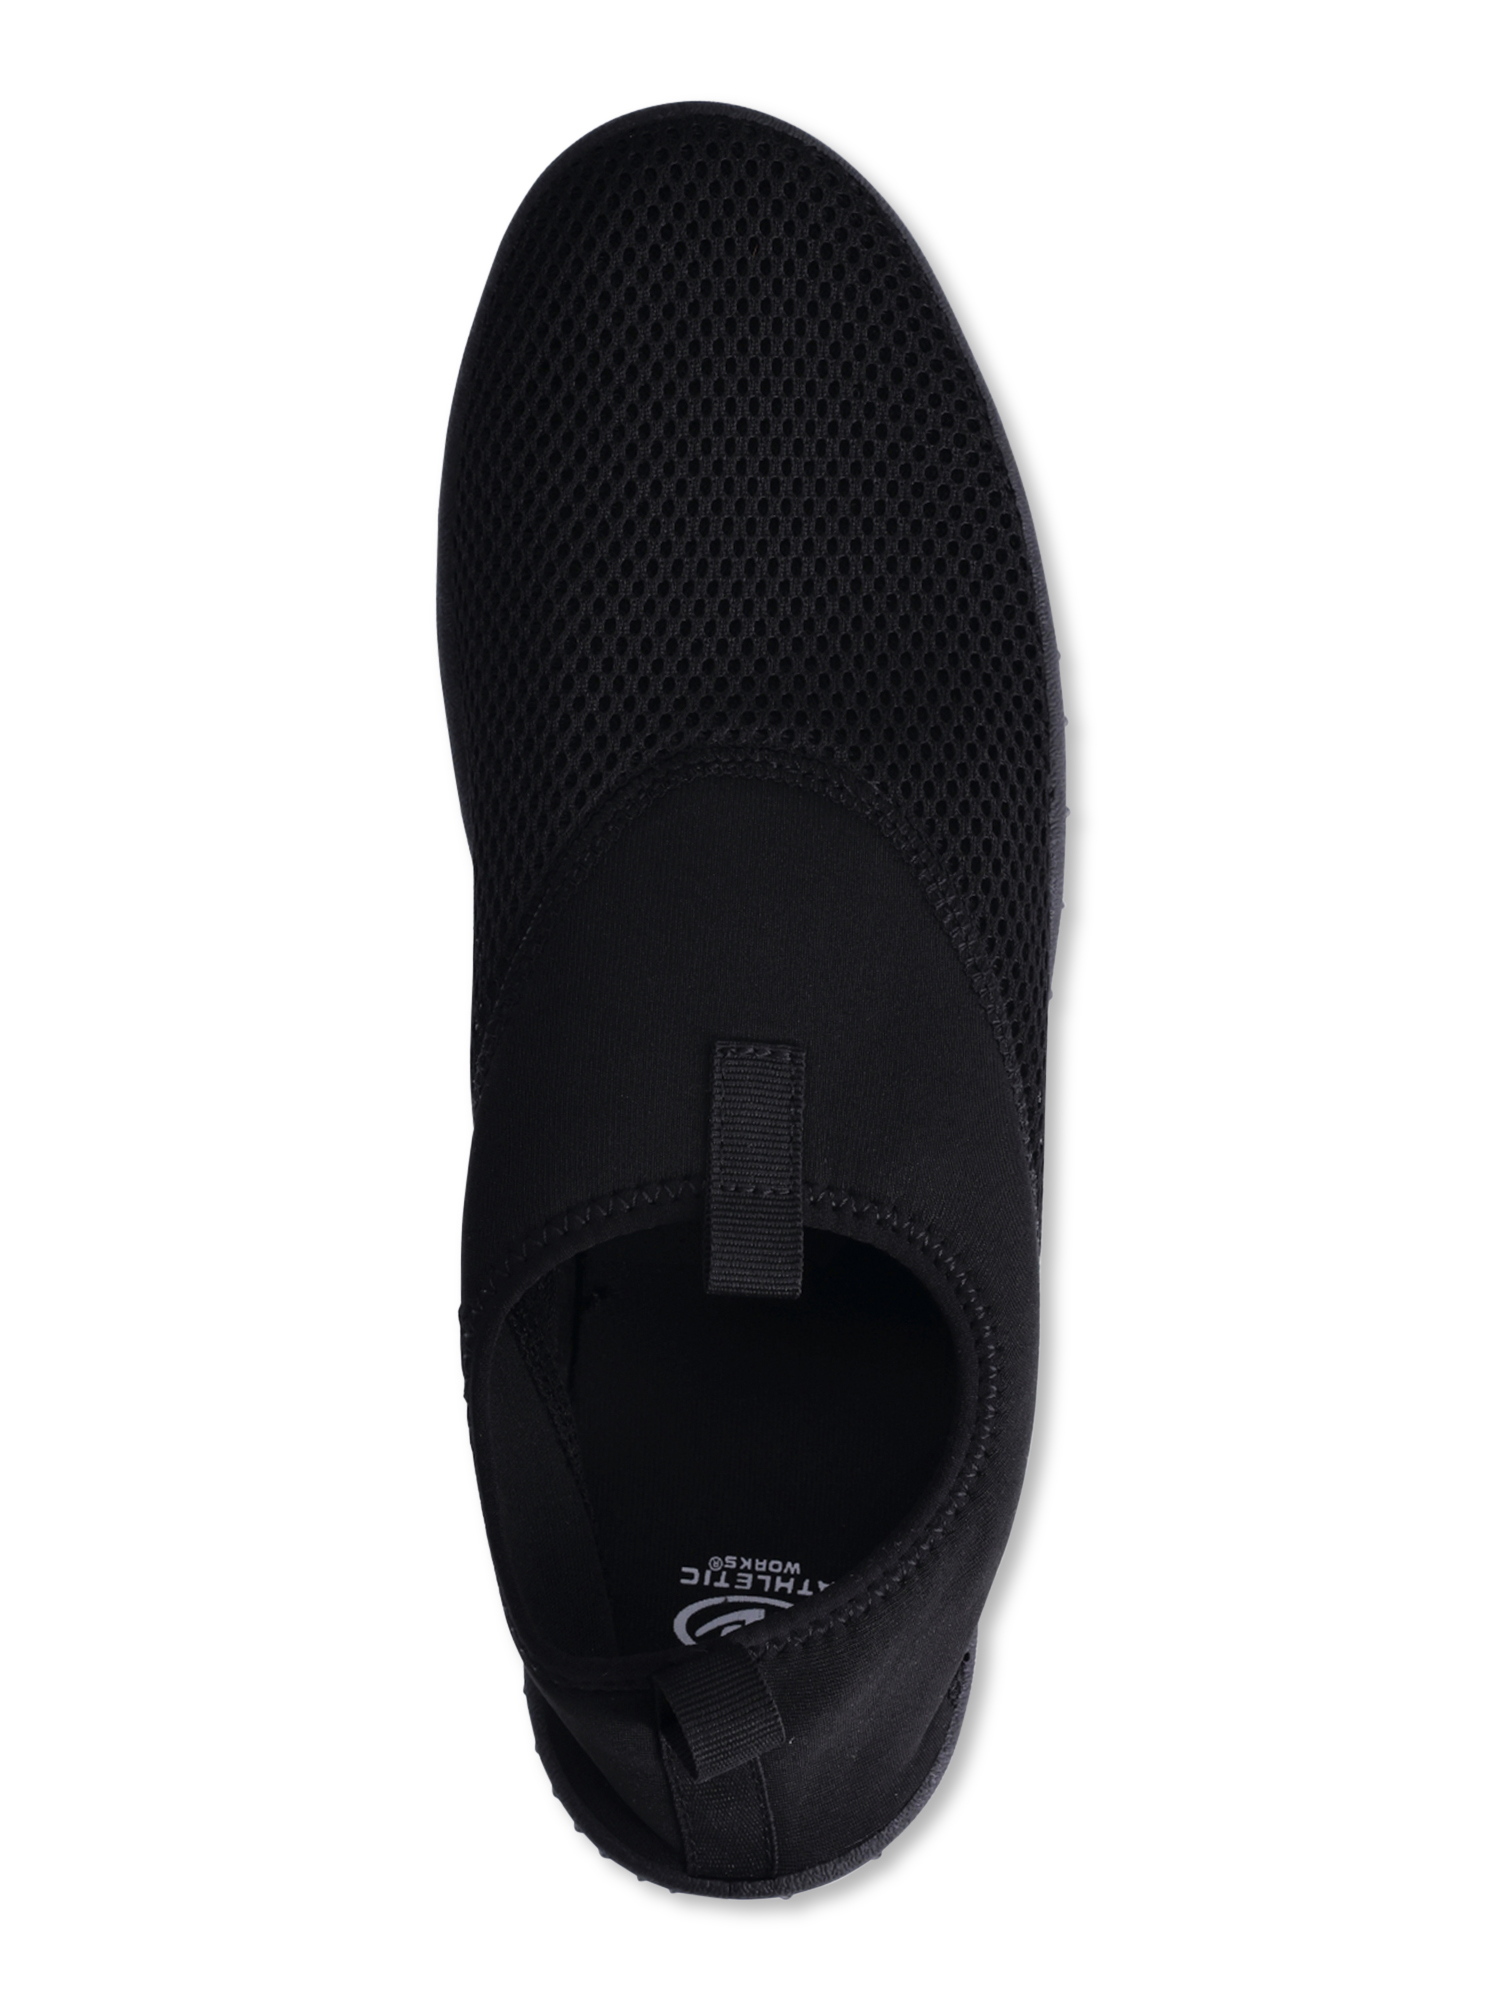 Athletic Works Men’s Water Shoes - image 5 of 5